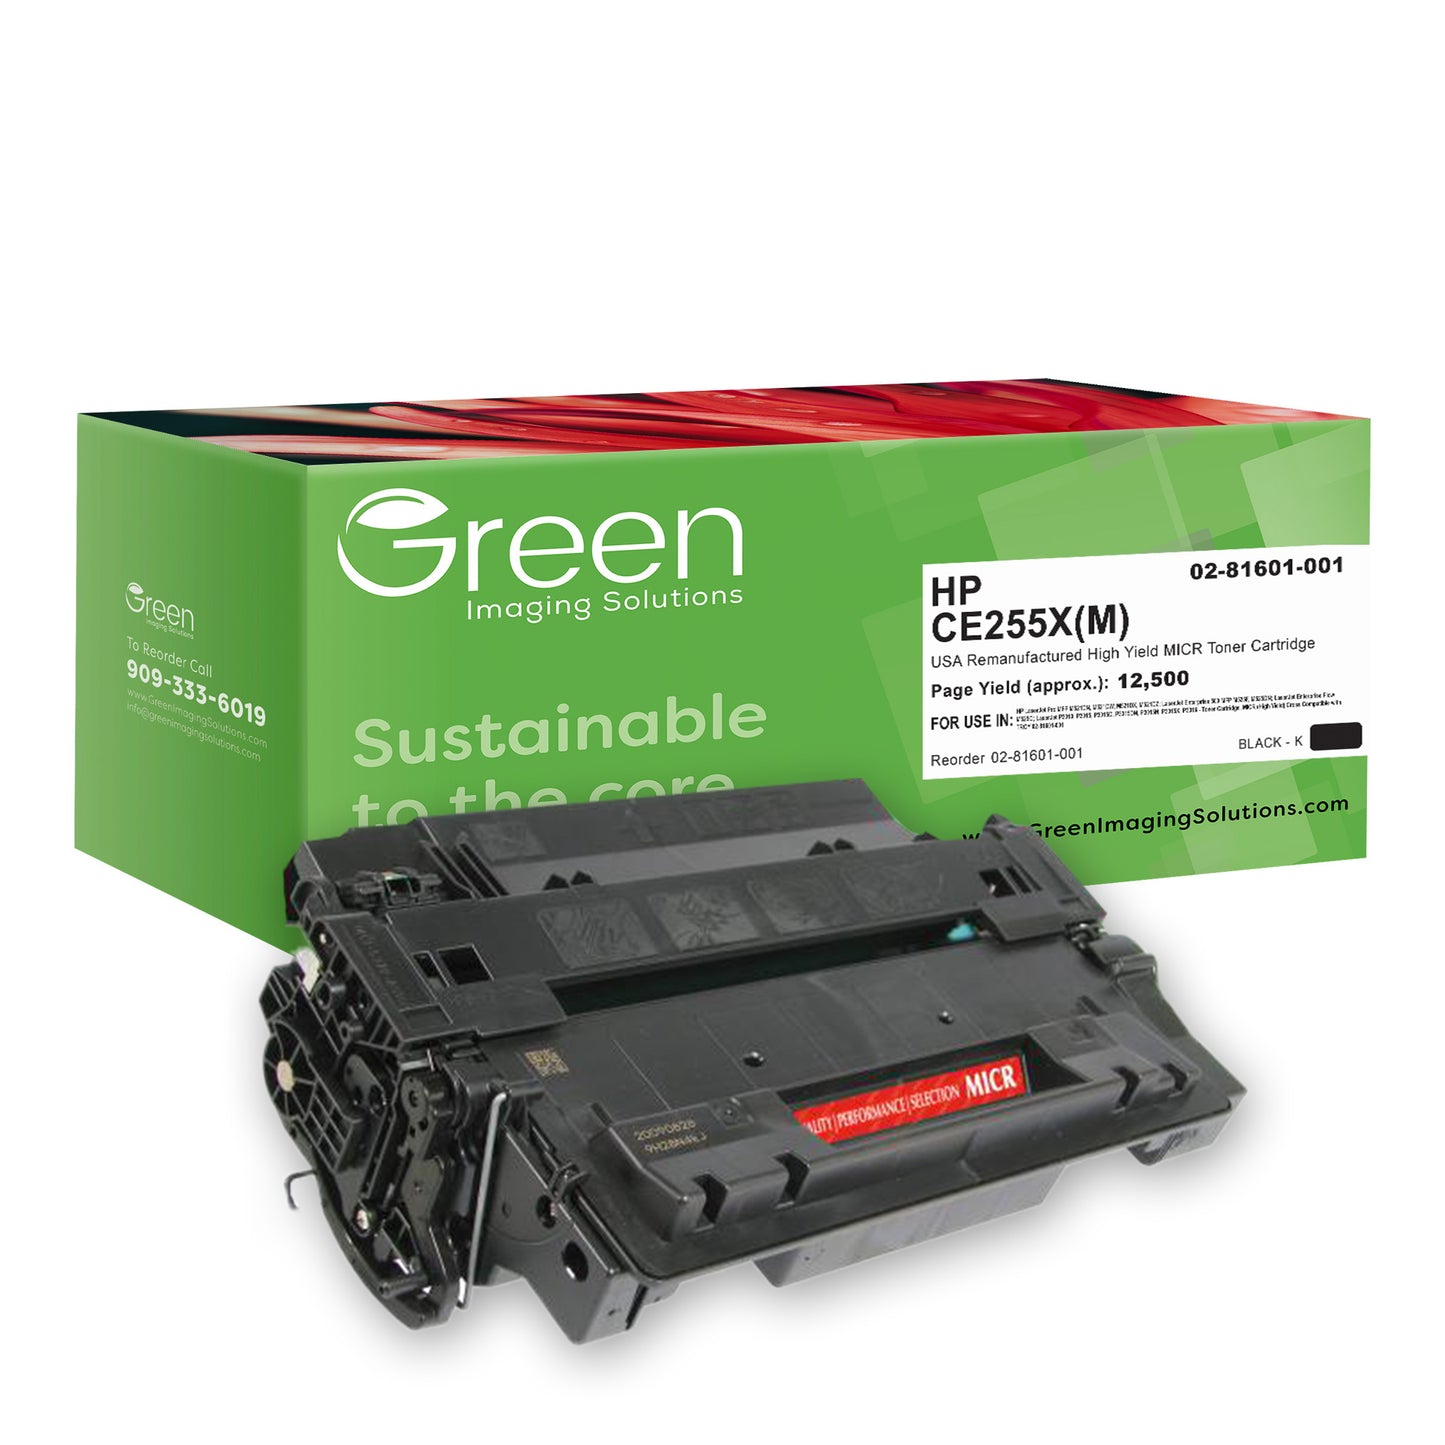 GIS USA Remanufactured High Yield MICR Toner Cartridge for HP CE255X, TROY 02-81601-001